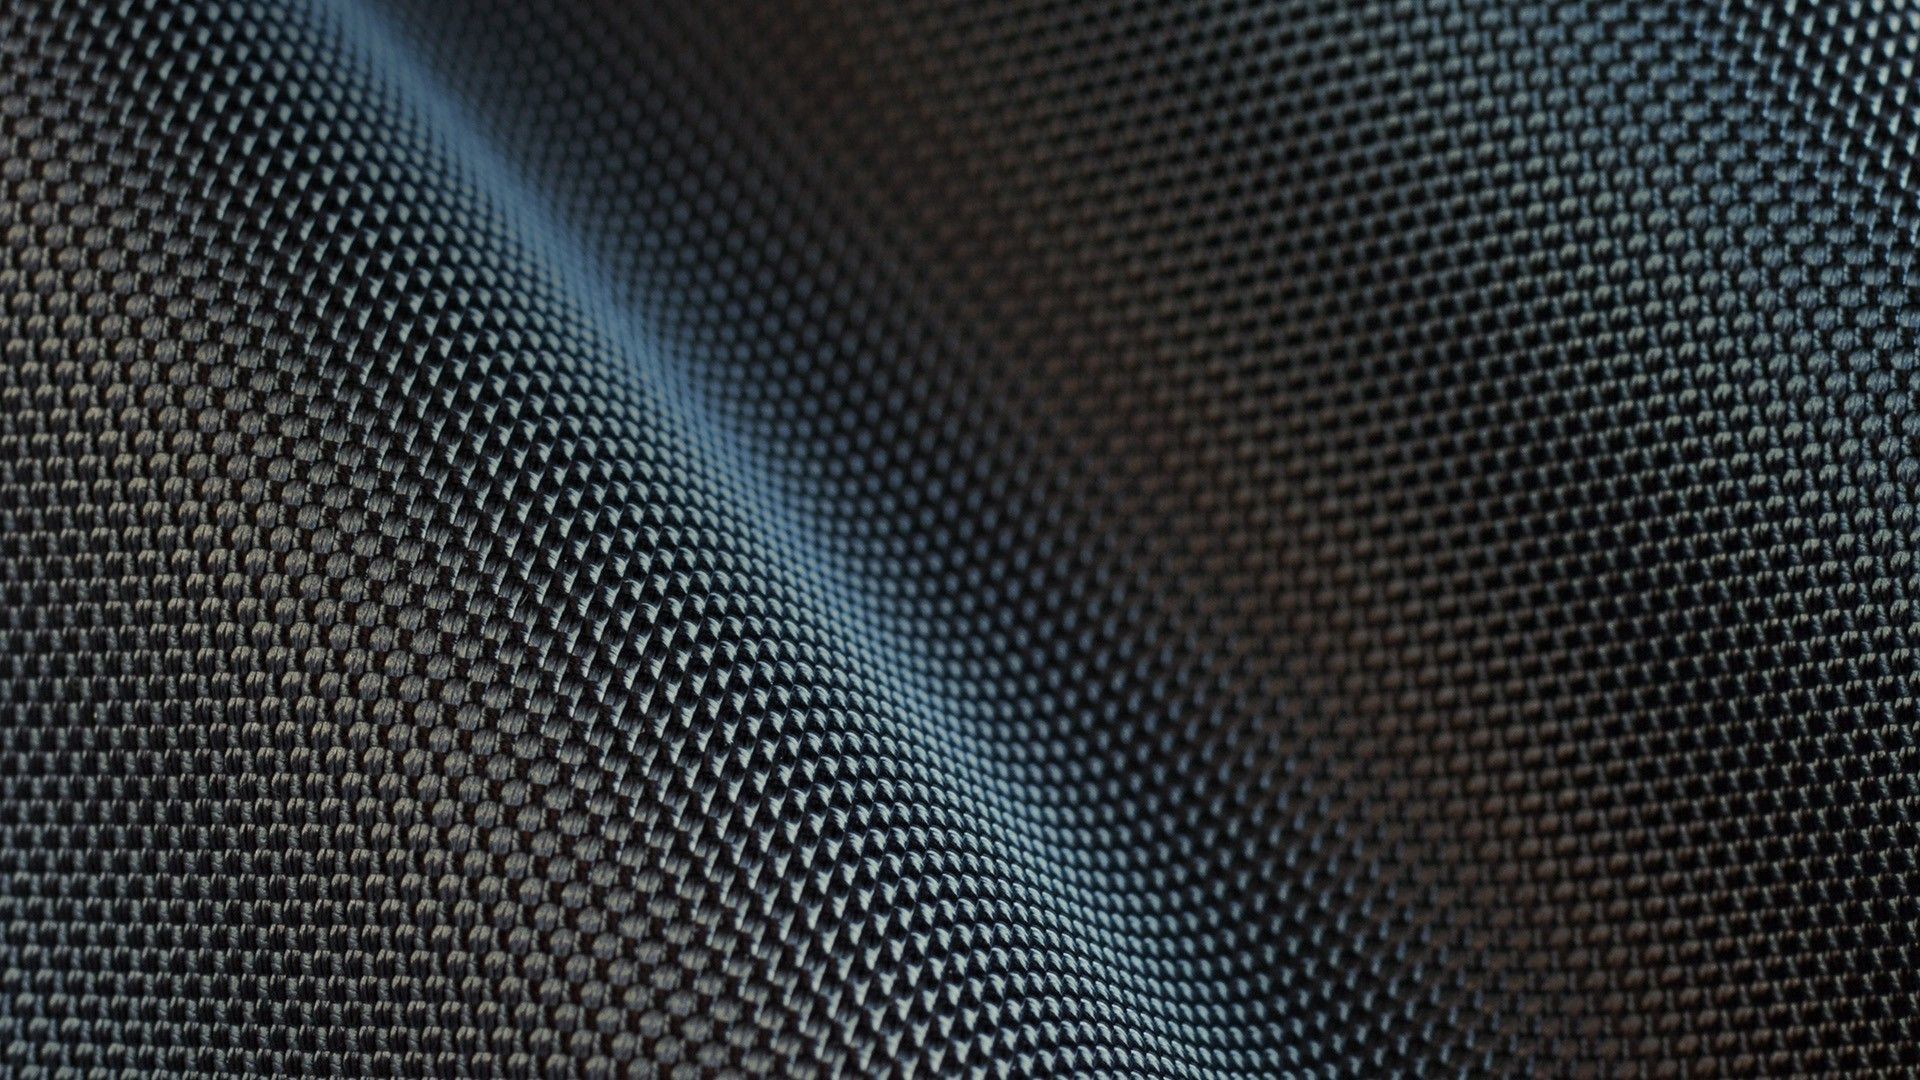 1920x1080 iPhone Wallpaper Carbon Fiber Awesome Download Hd Wallpapers Of Digital Art  Minimalism Pattern